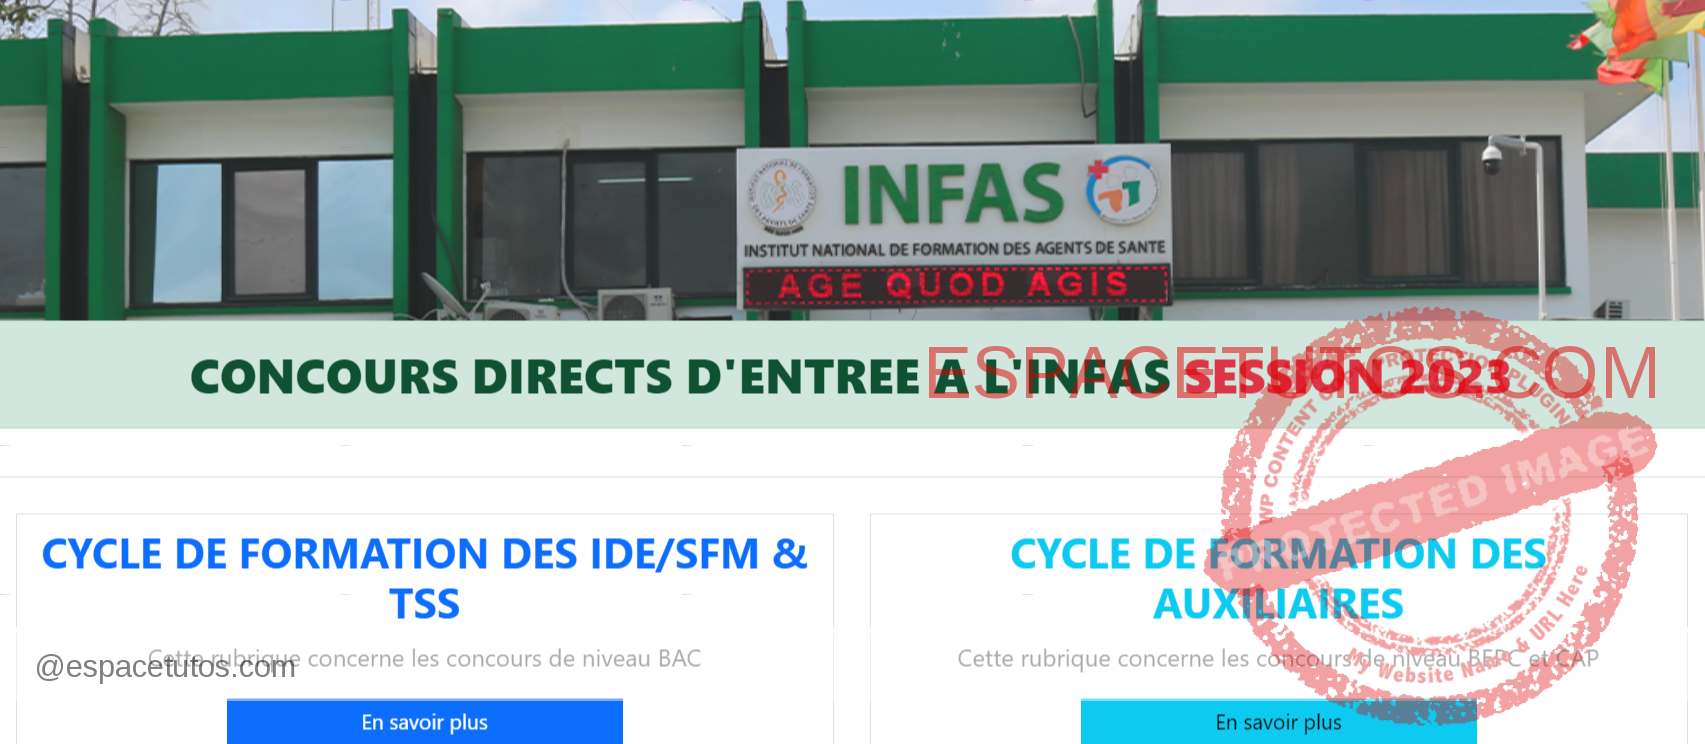 CONCOURS DIRECTS D'ENTREE A L'INFAS SESSION 2023